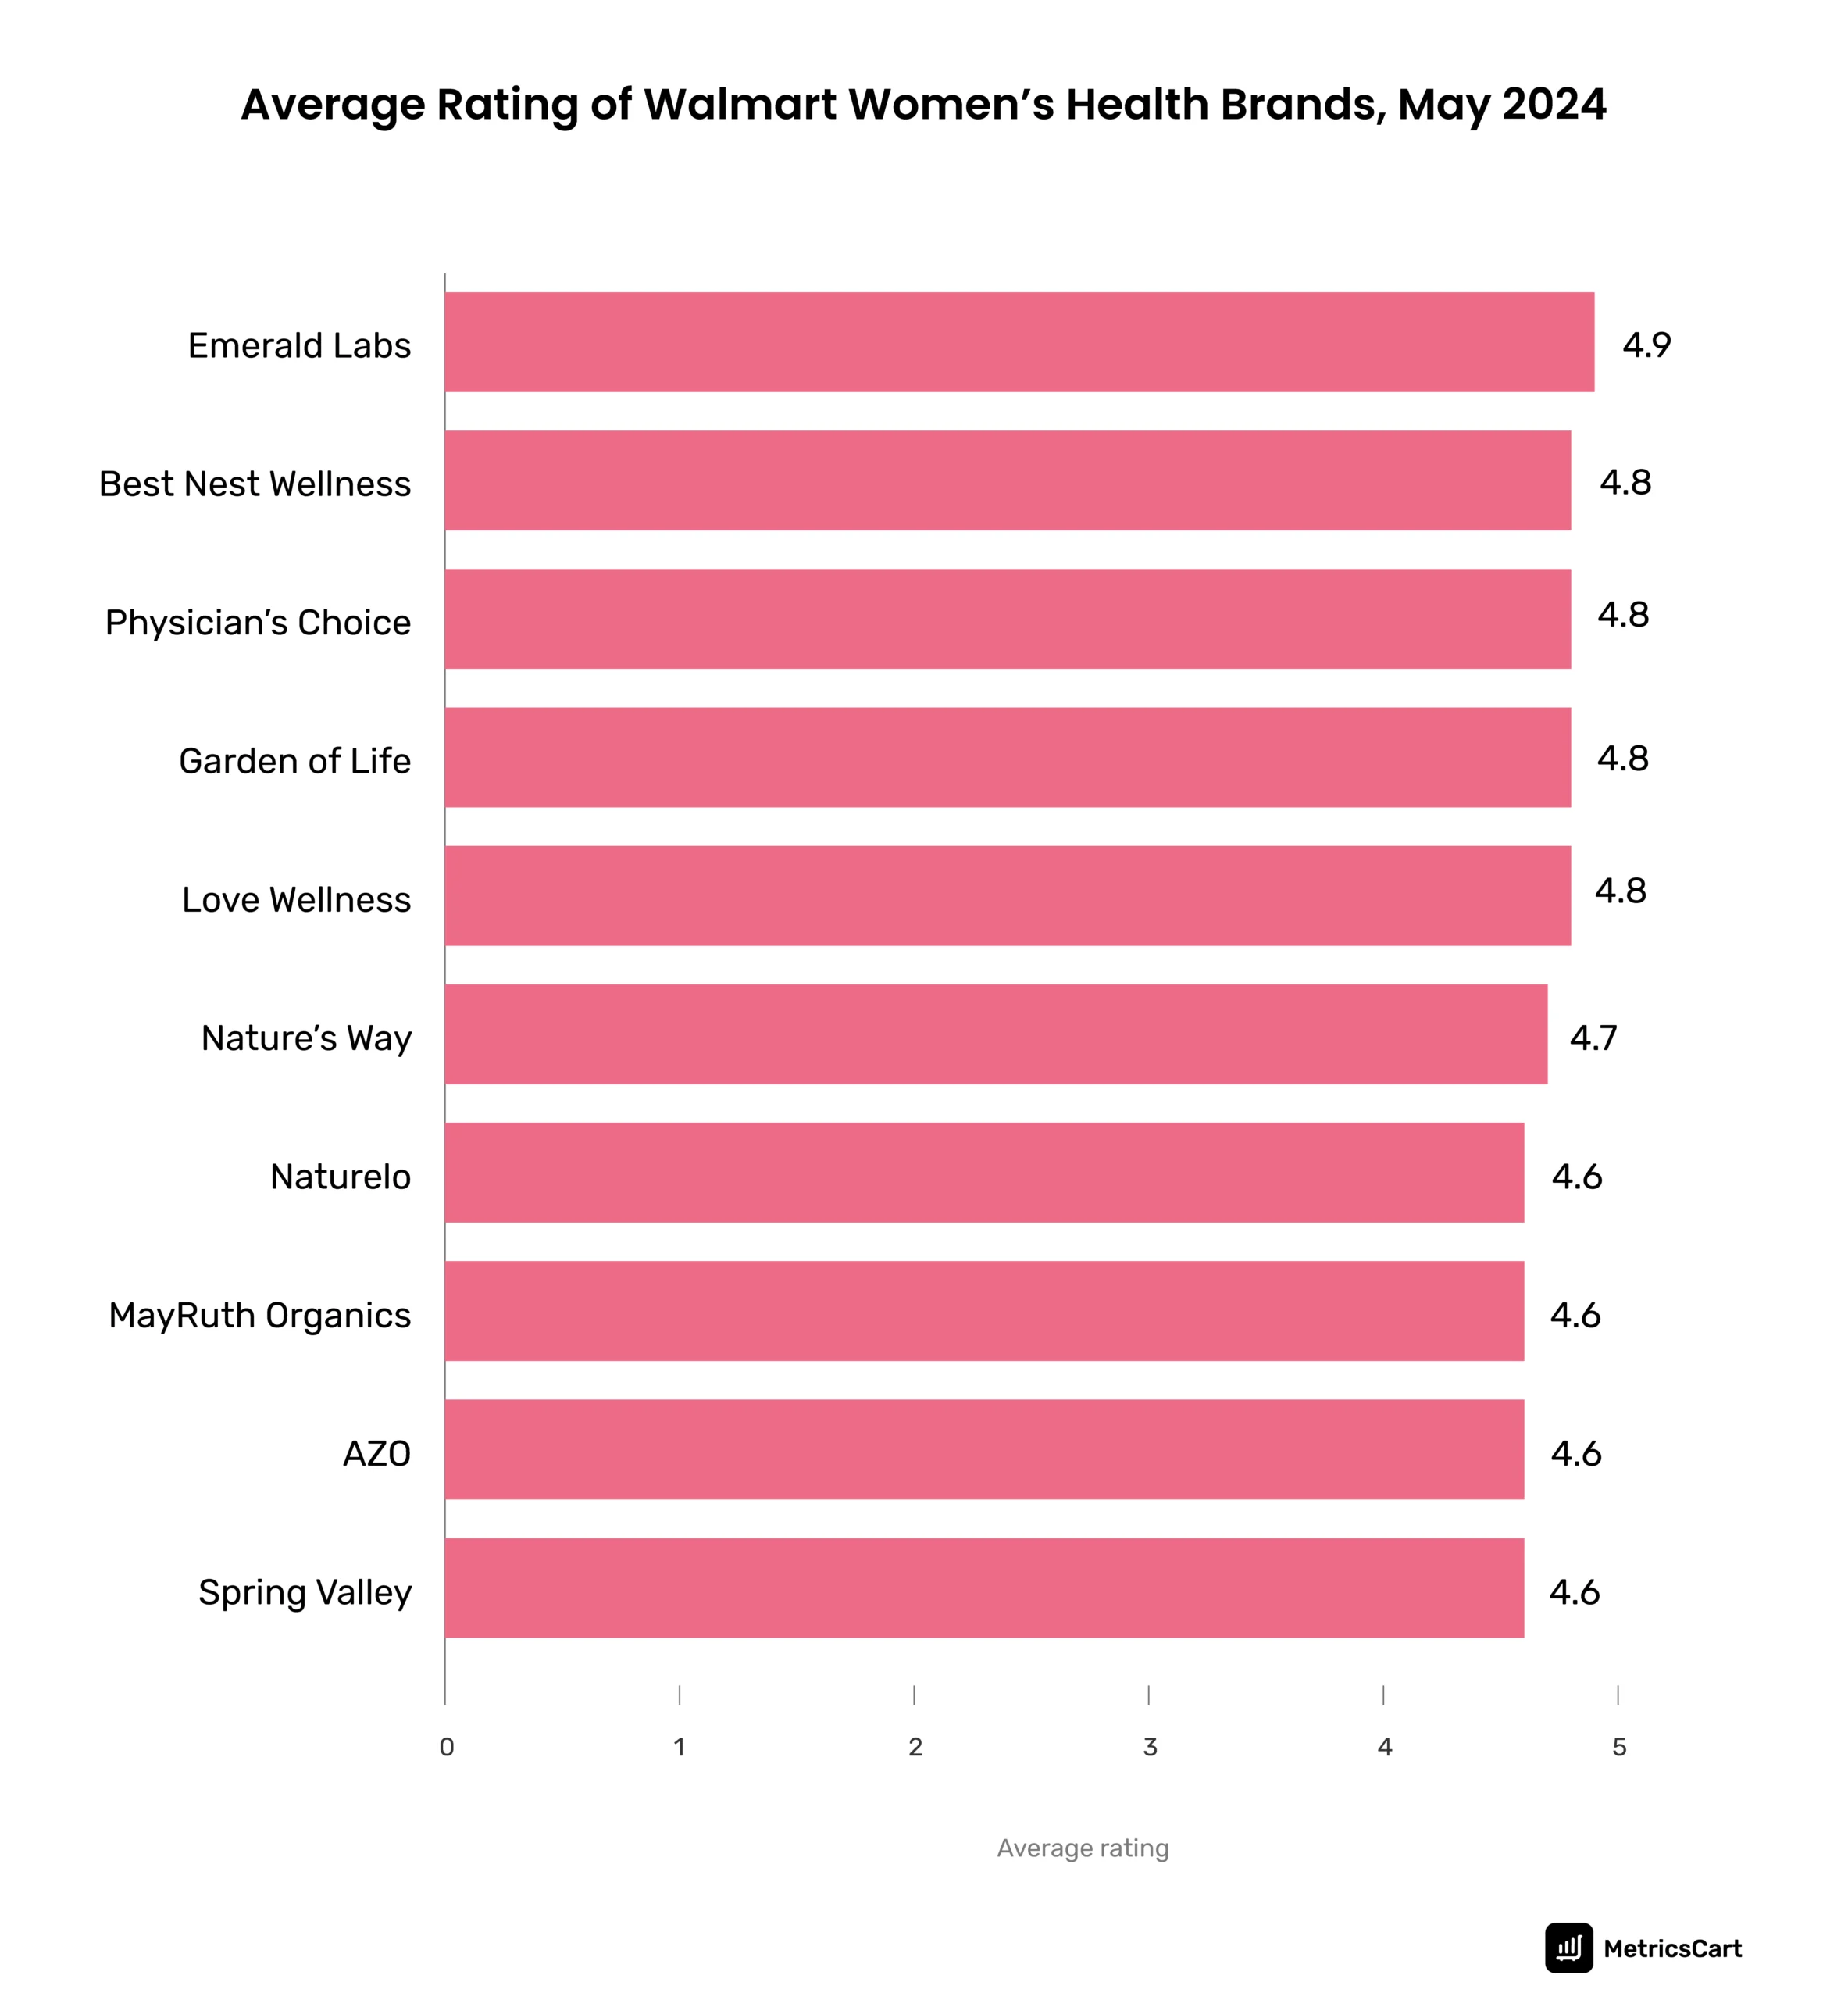 the average rating received by various women’s health brands at Walmart in 2024. 